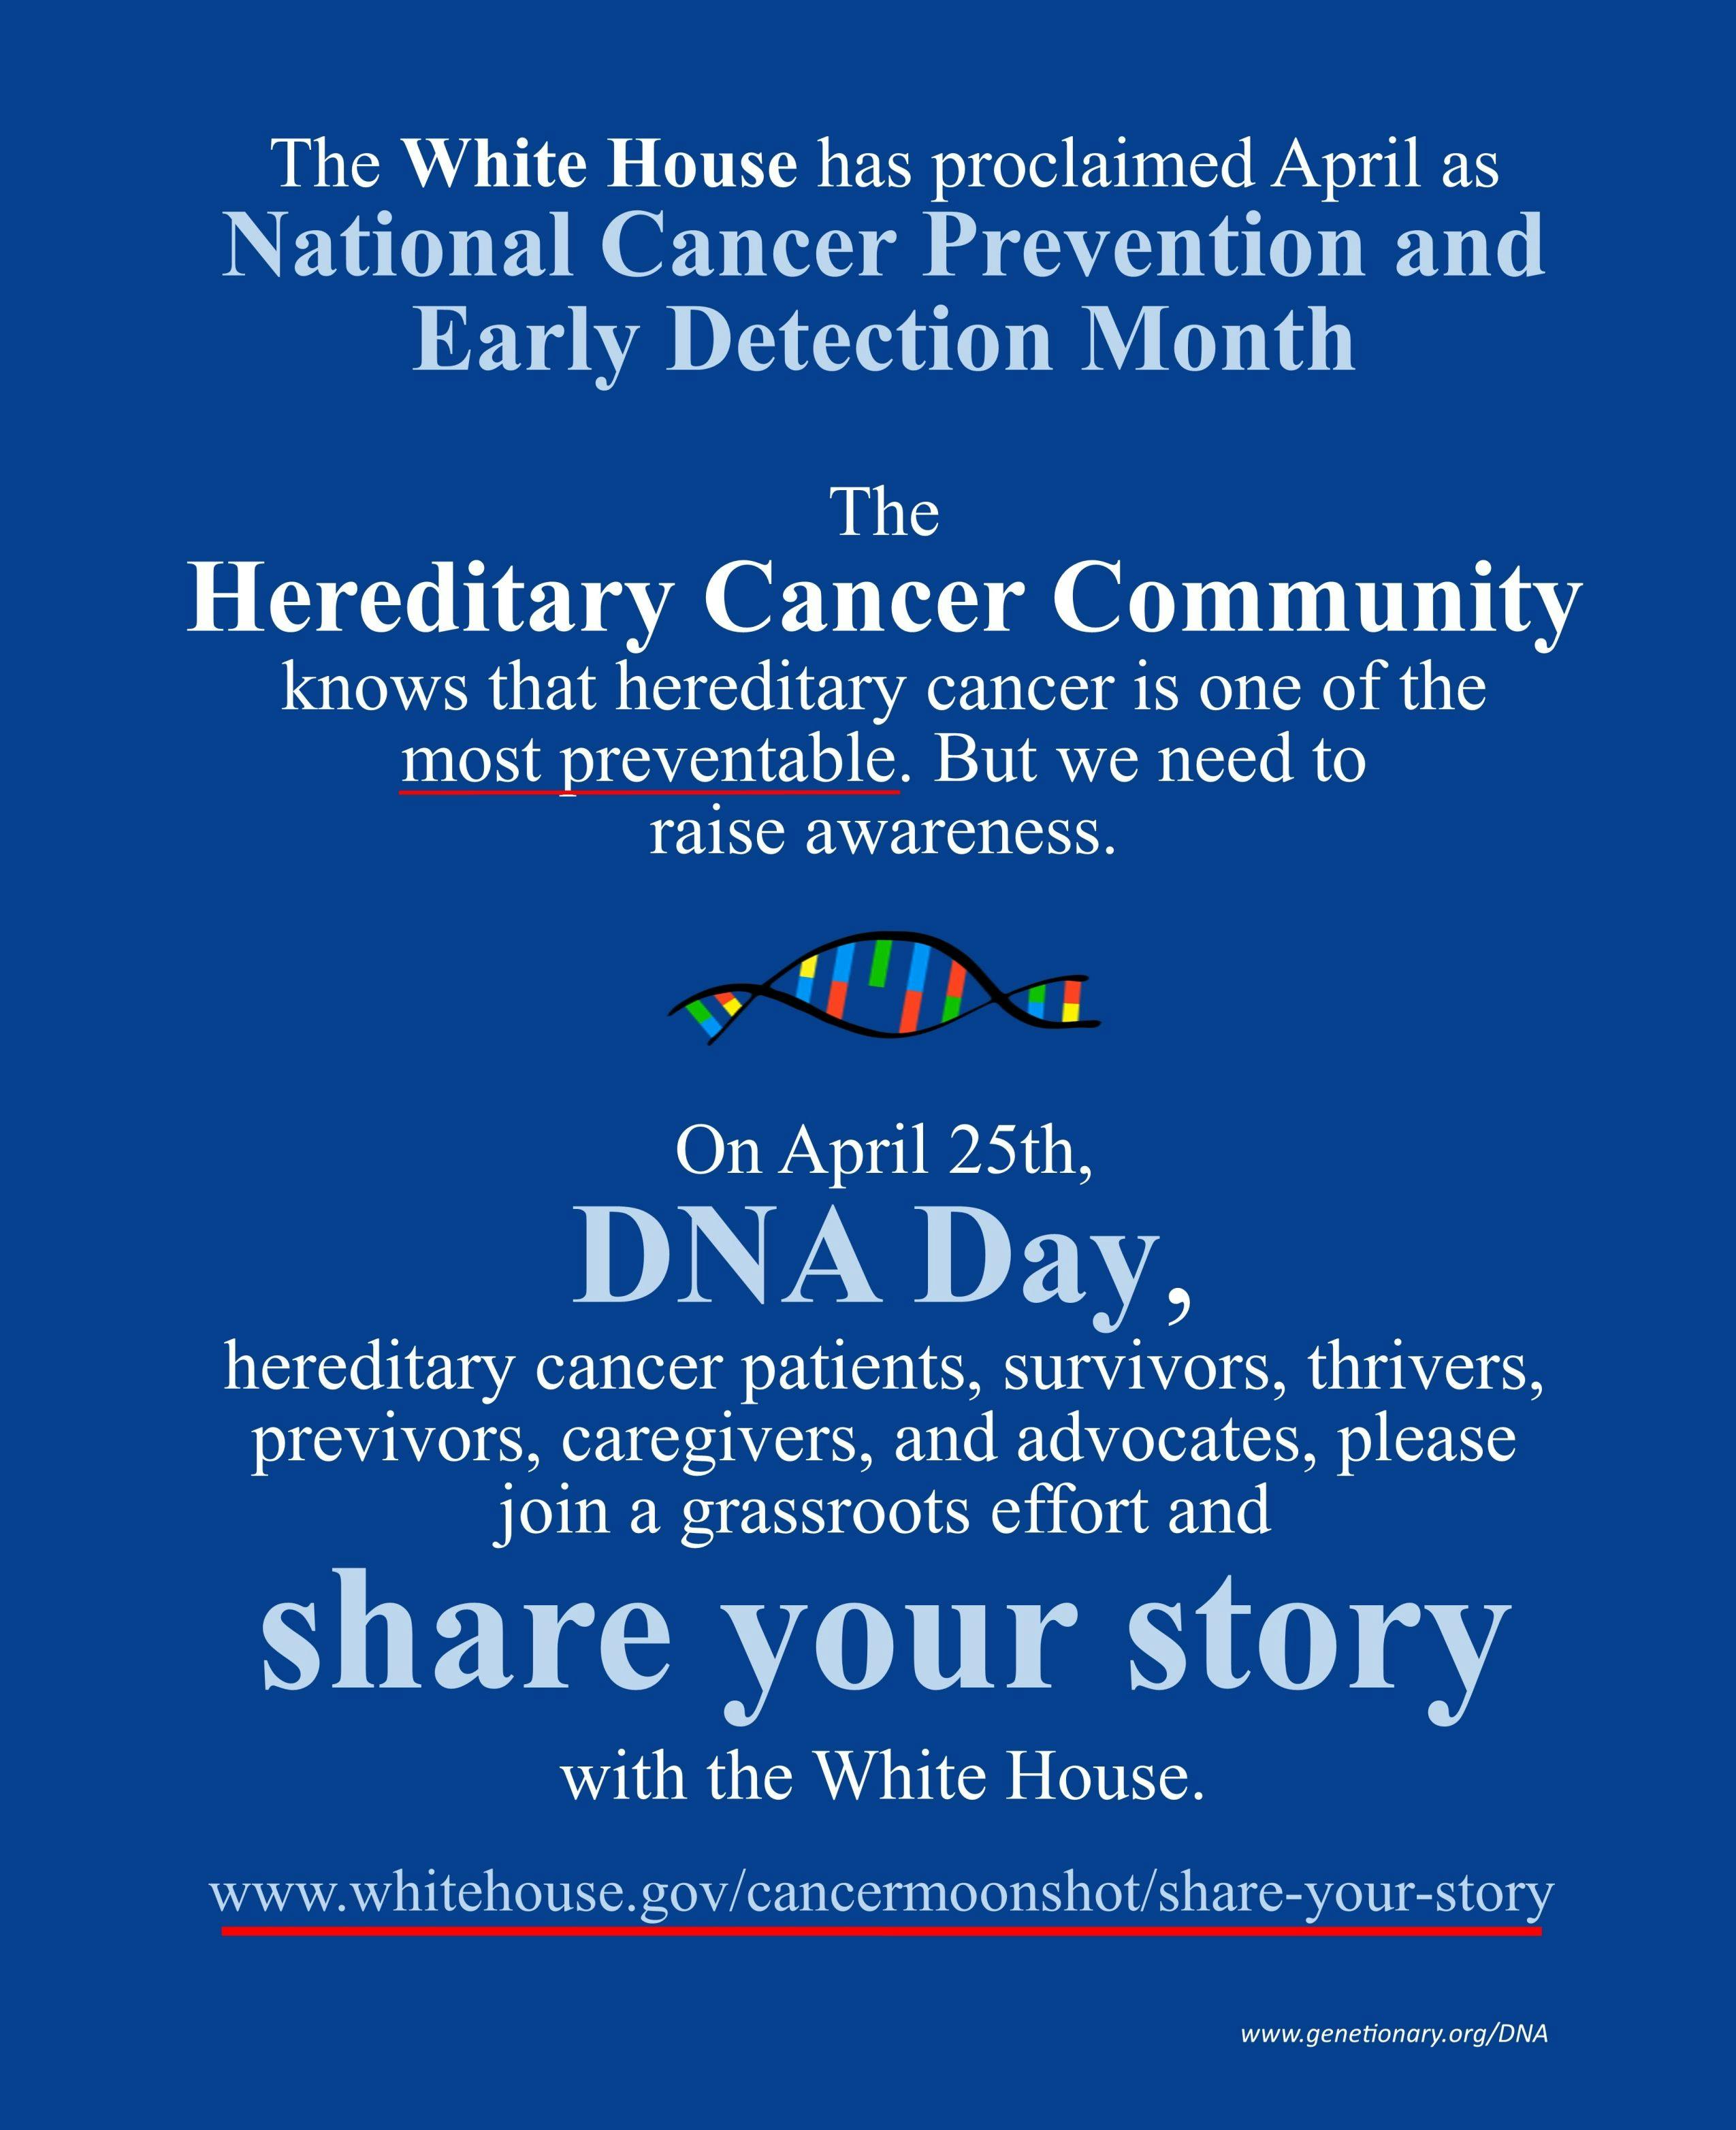 Image of a social media post about hereditary cancer.